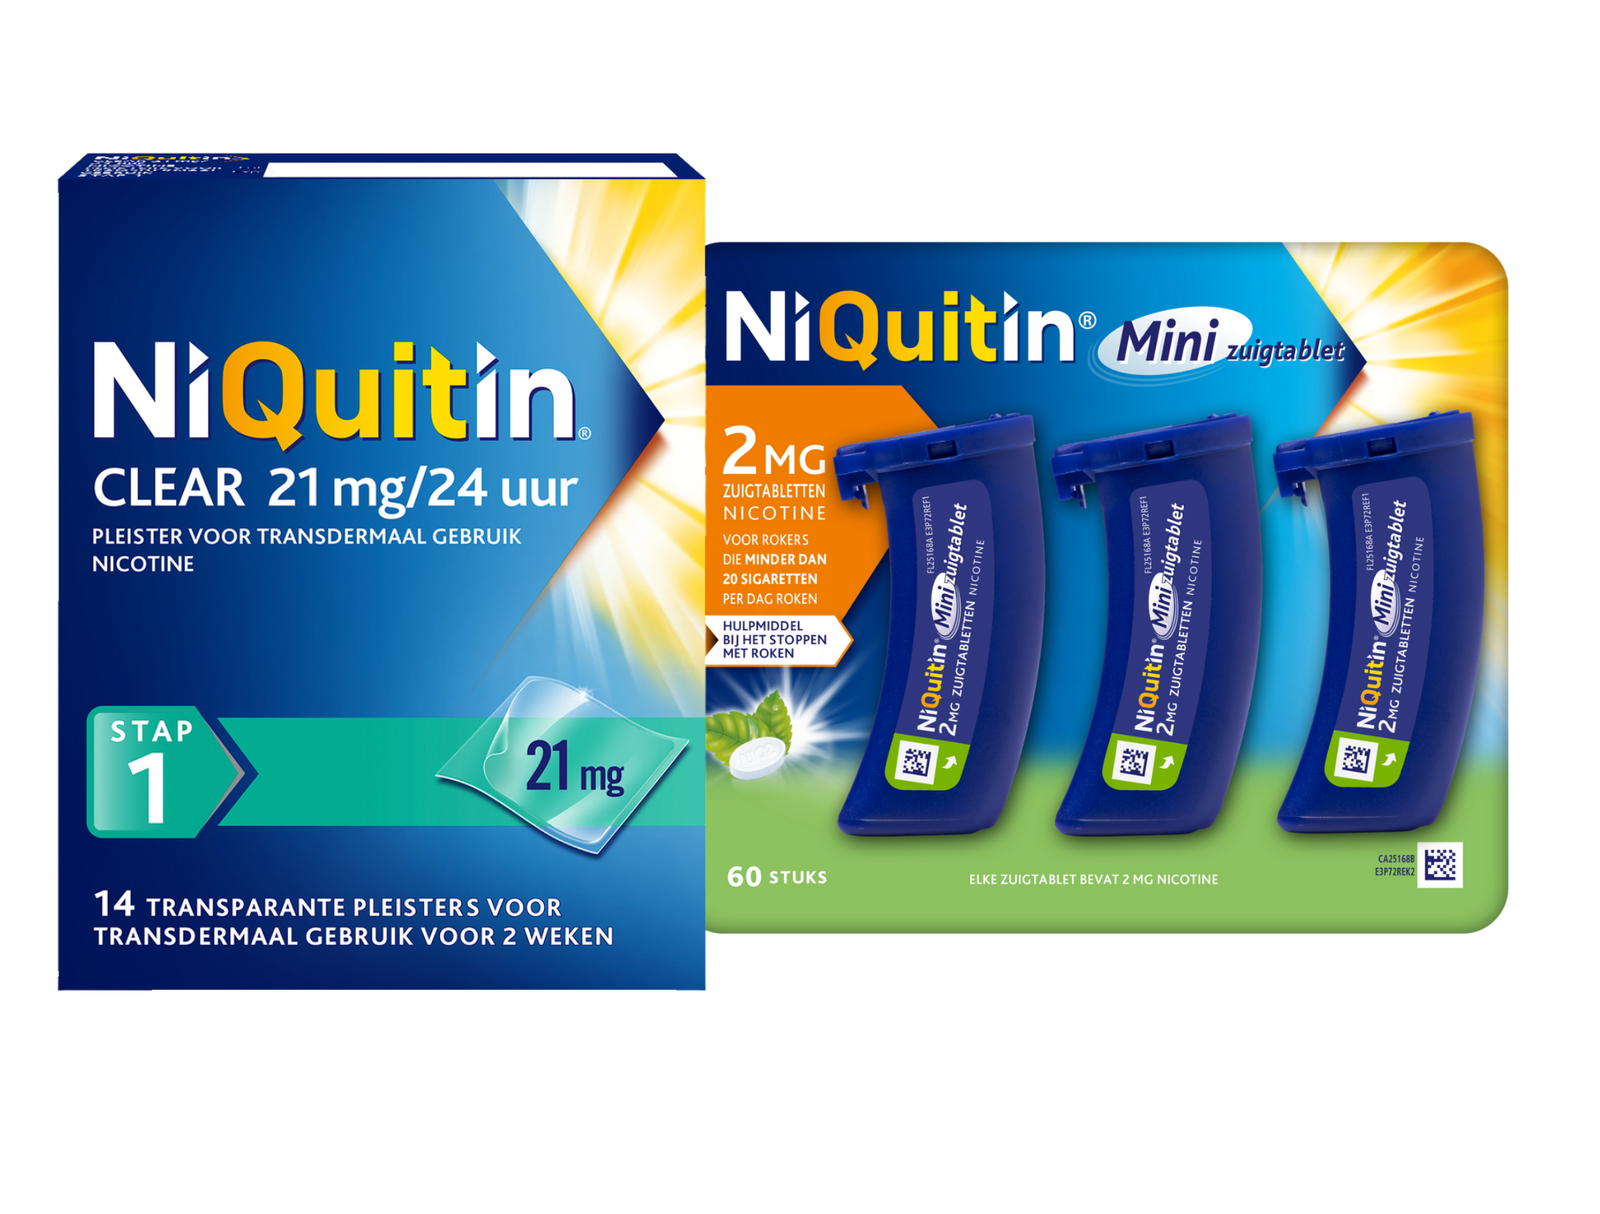 Image of Niquitin Minizuigtabletten Mint 2.0mg + Clear Pleisters 21mg Stap 1 Combi 